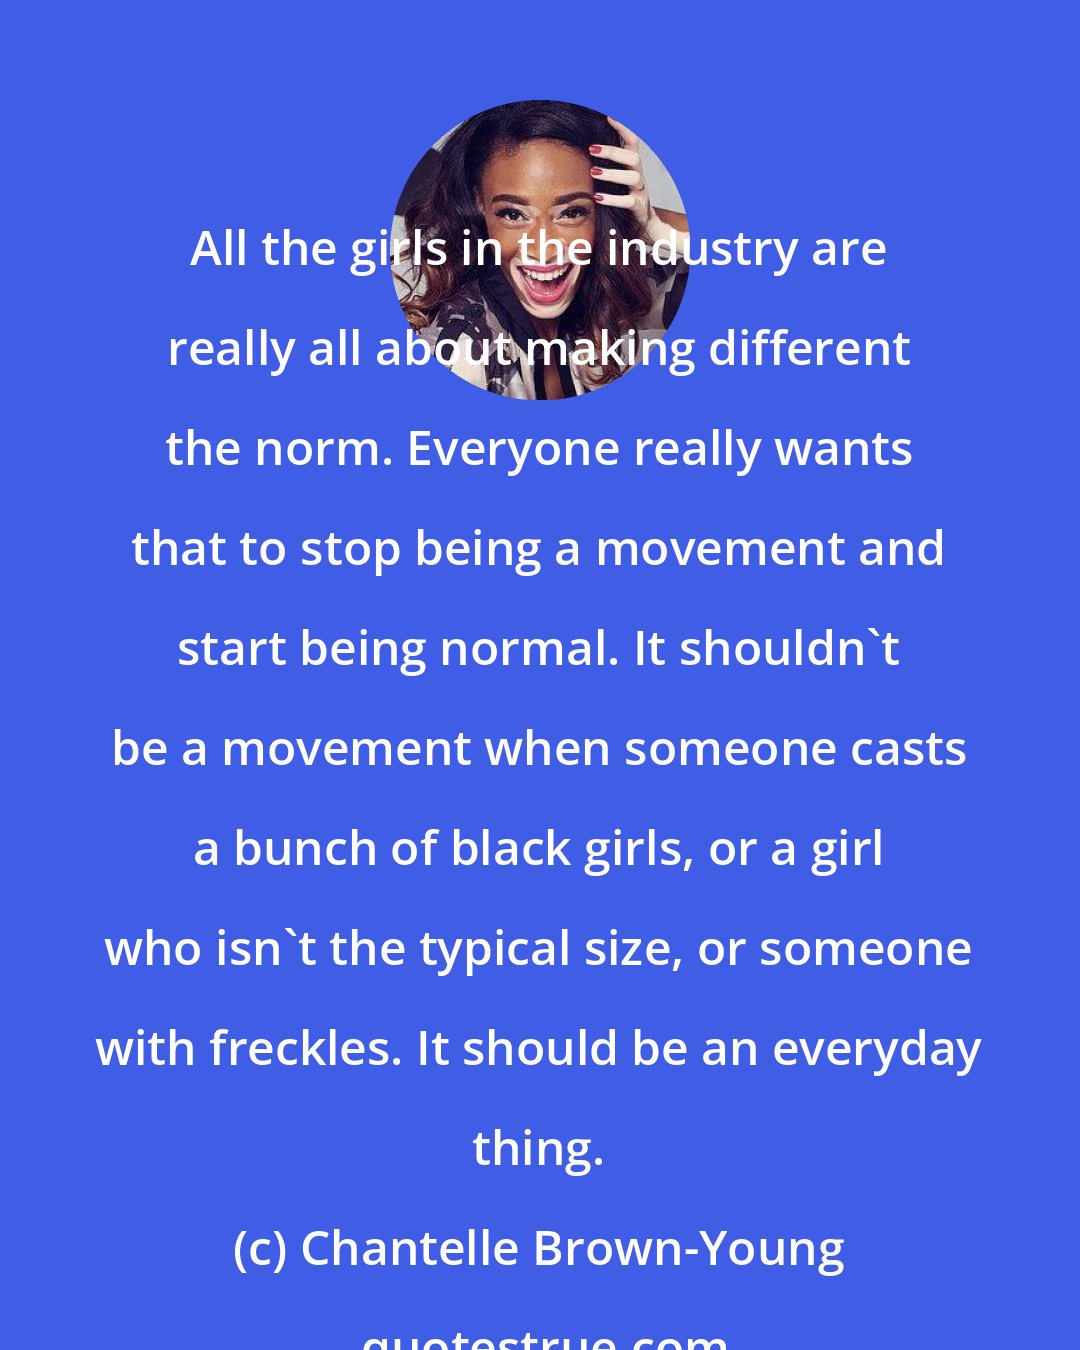 Chantelle Brown-Young: All the girls in the industry are really all about making different the norm. Everyone really wants that to stop being a movement and start being normal. It shouldn't be a movement when someone casts a bunch of black girls, or a girl who isn't the typical size, or someone with freckles. It should be an everyday thing.